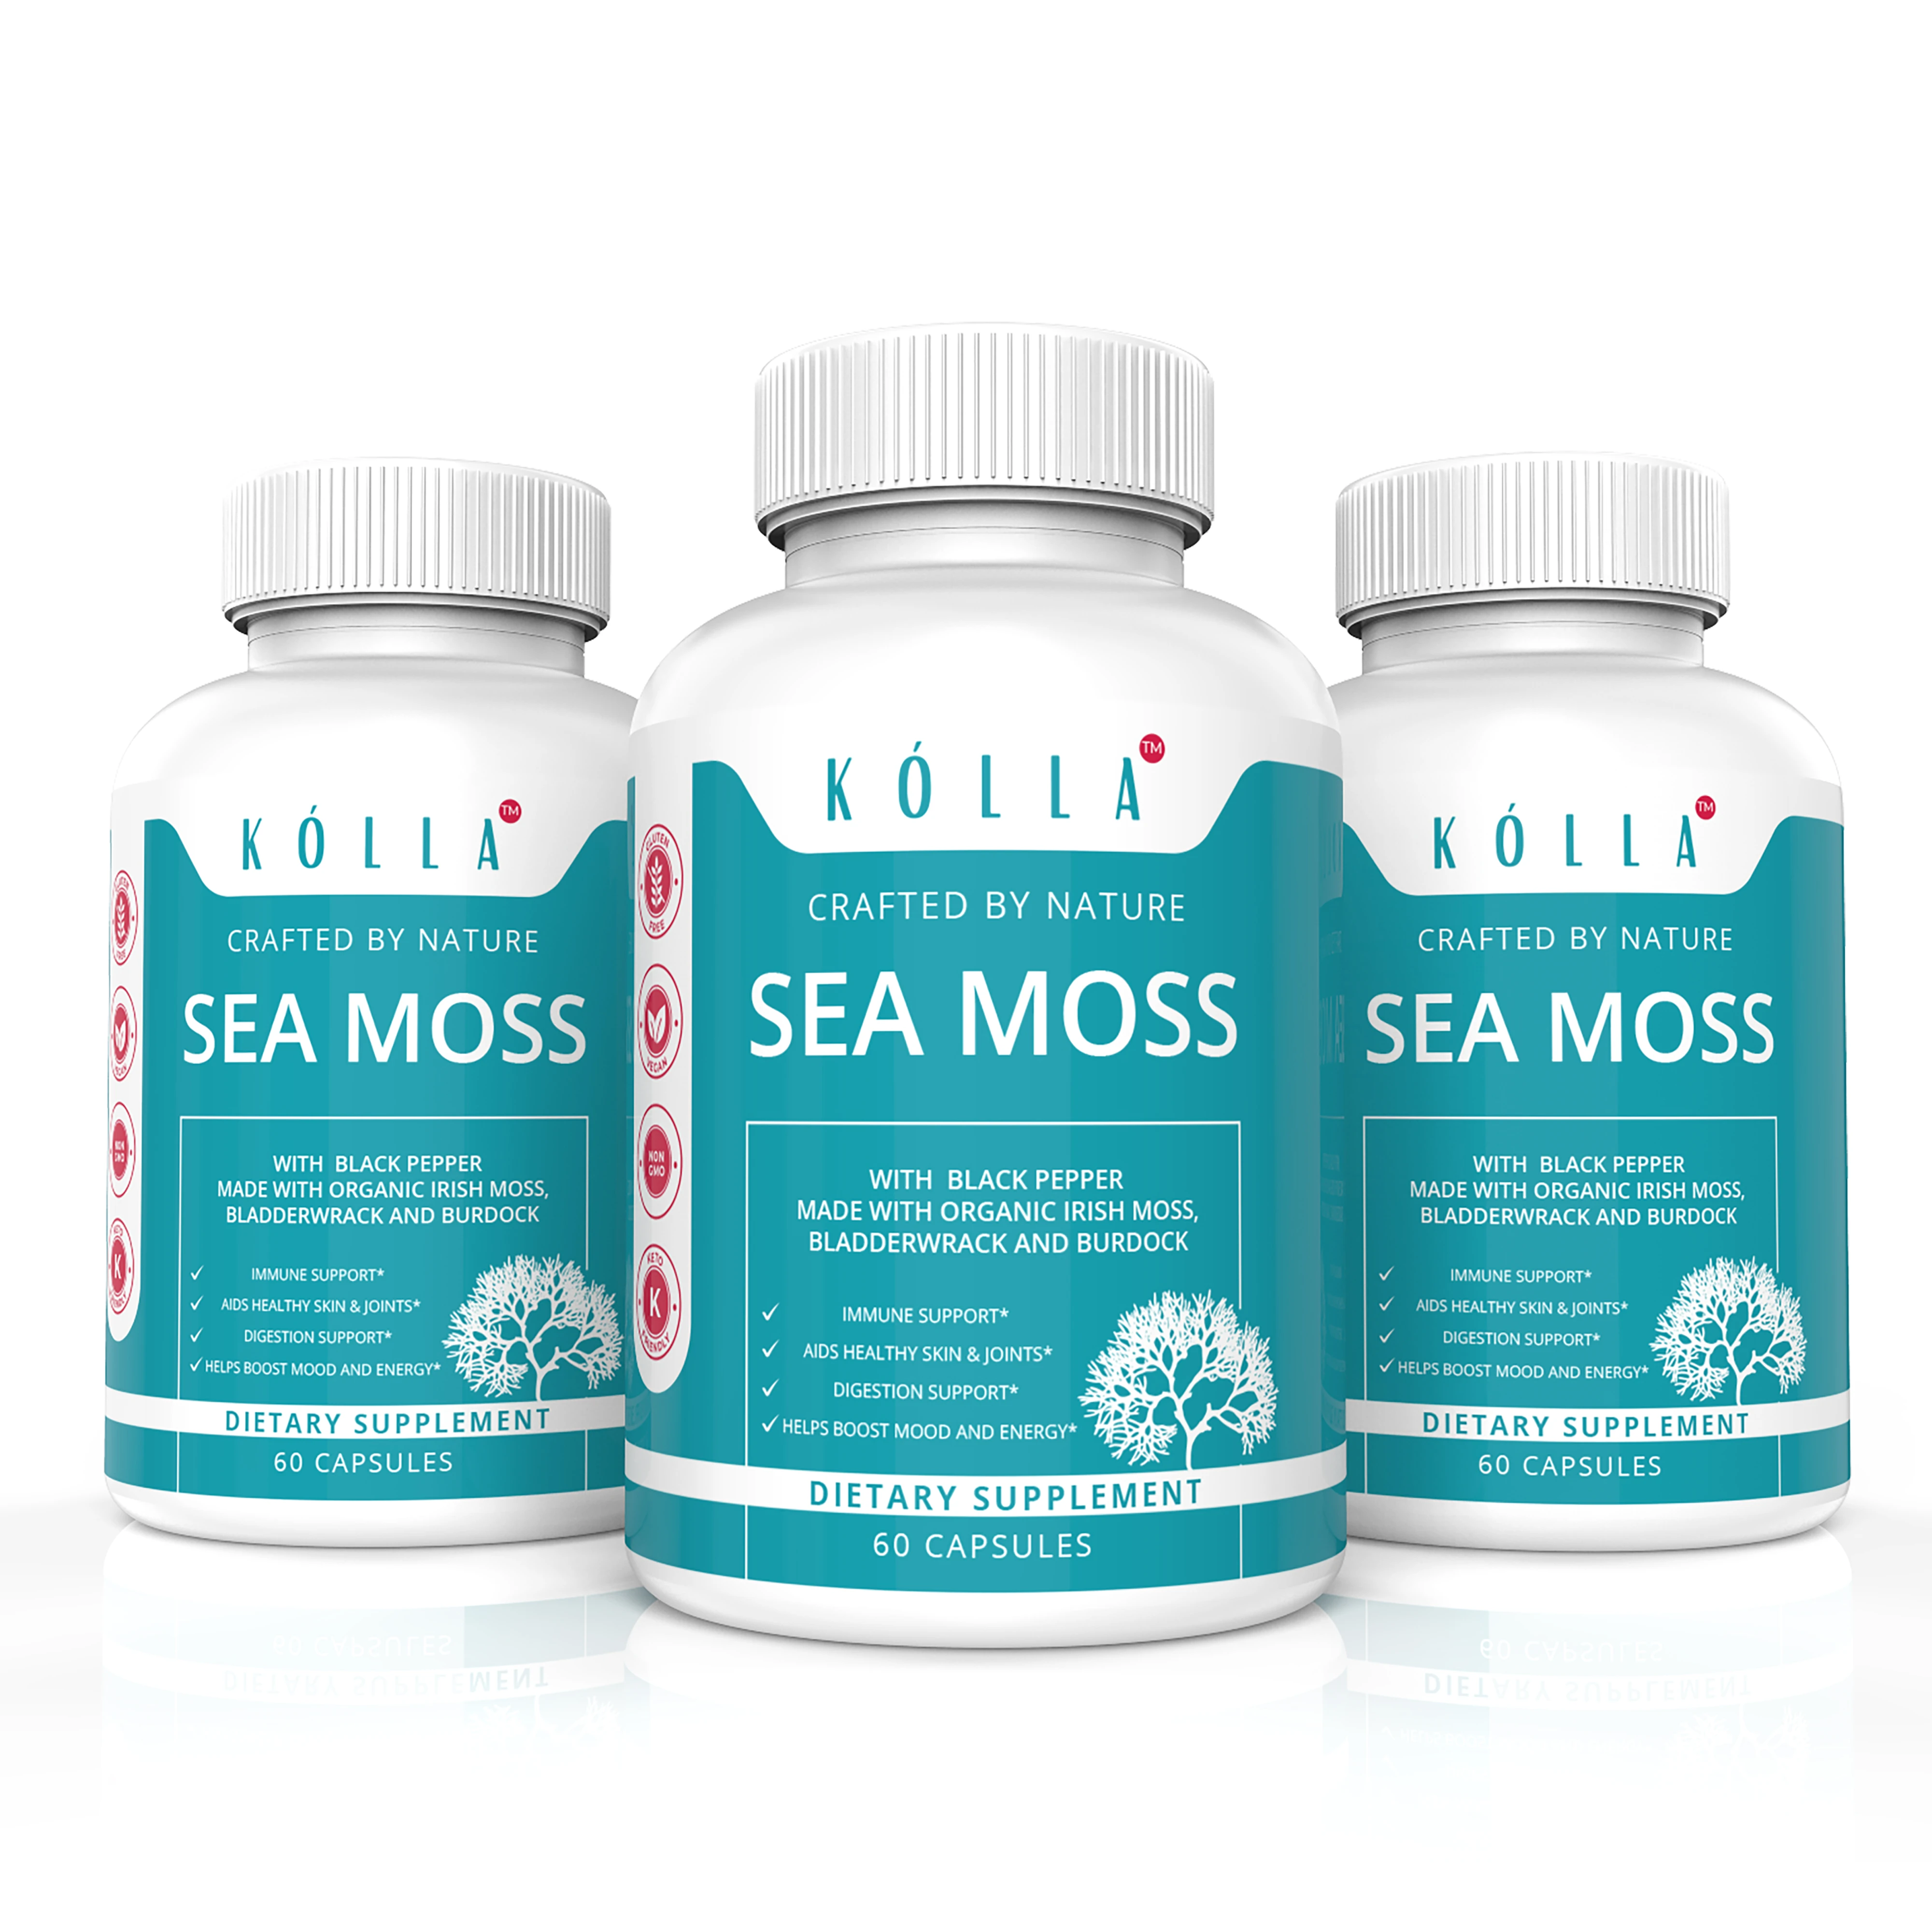 The Creator of Kolla Sea Moss, Kolla Global, Launched Its eCommerce Store In The USA